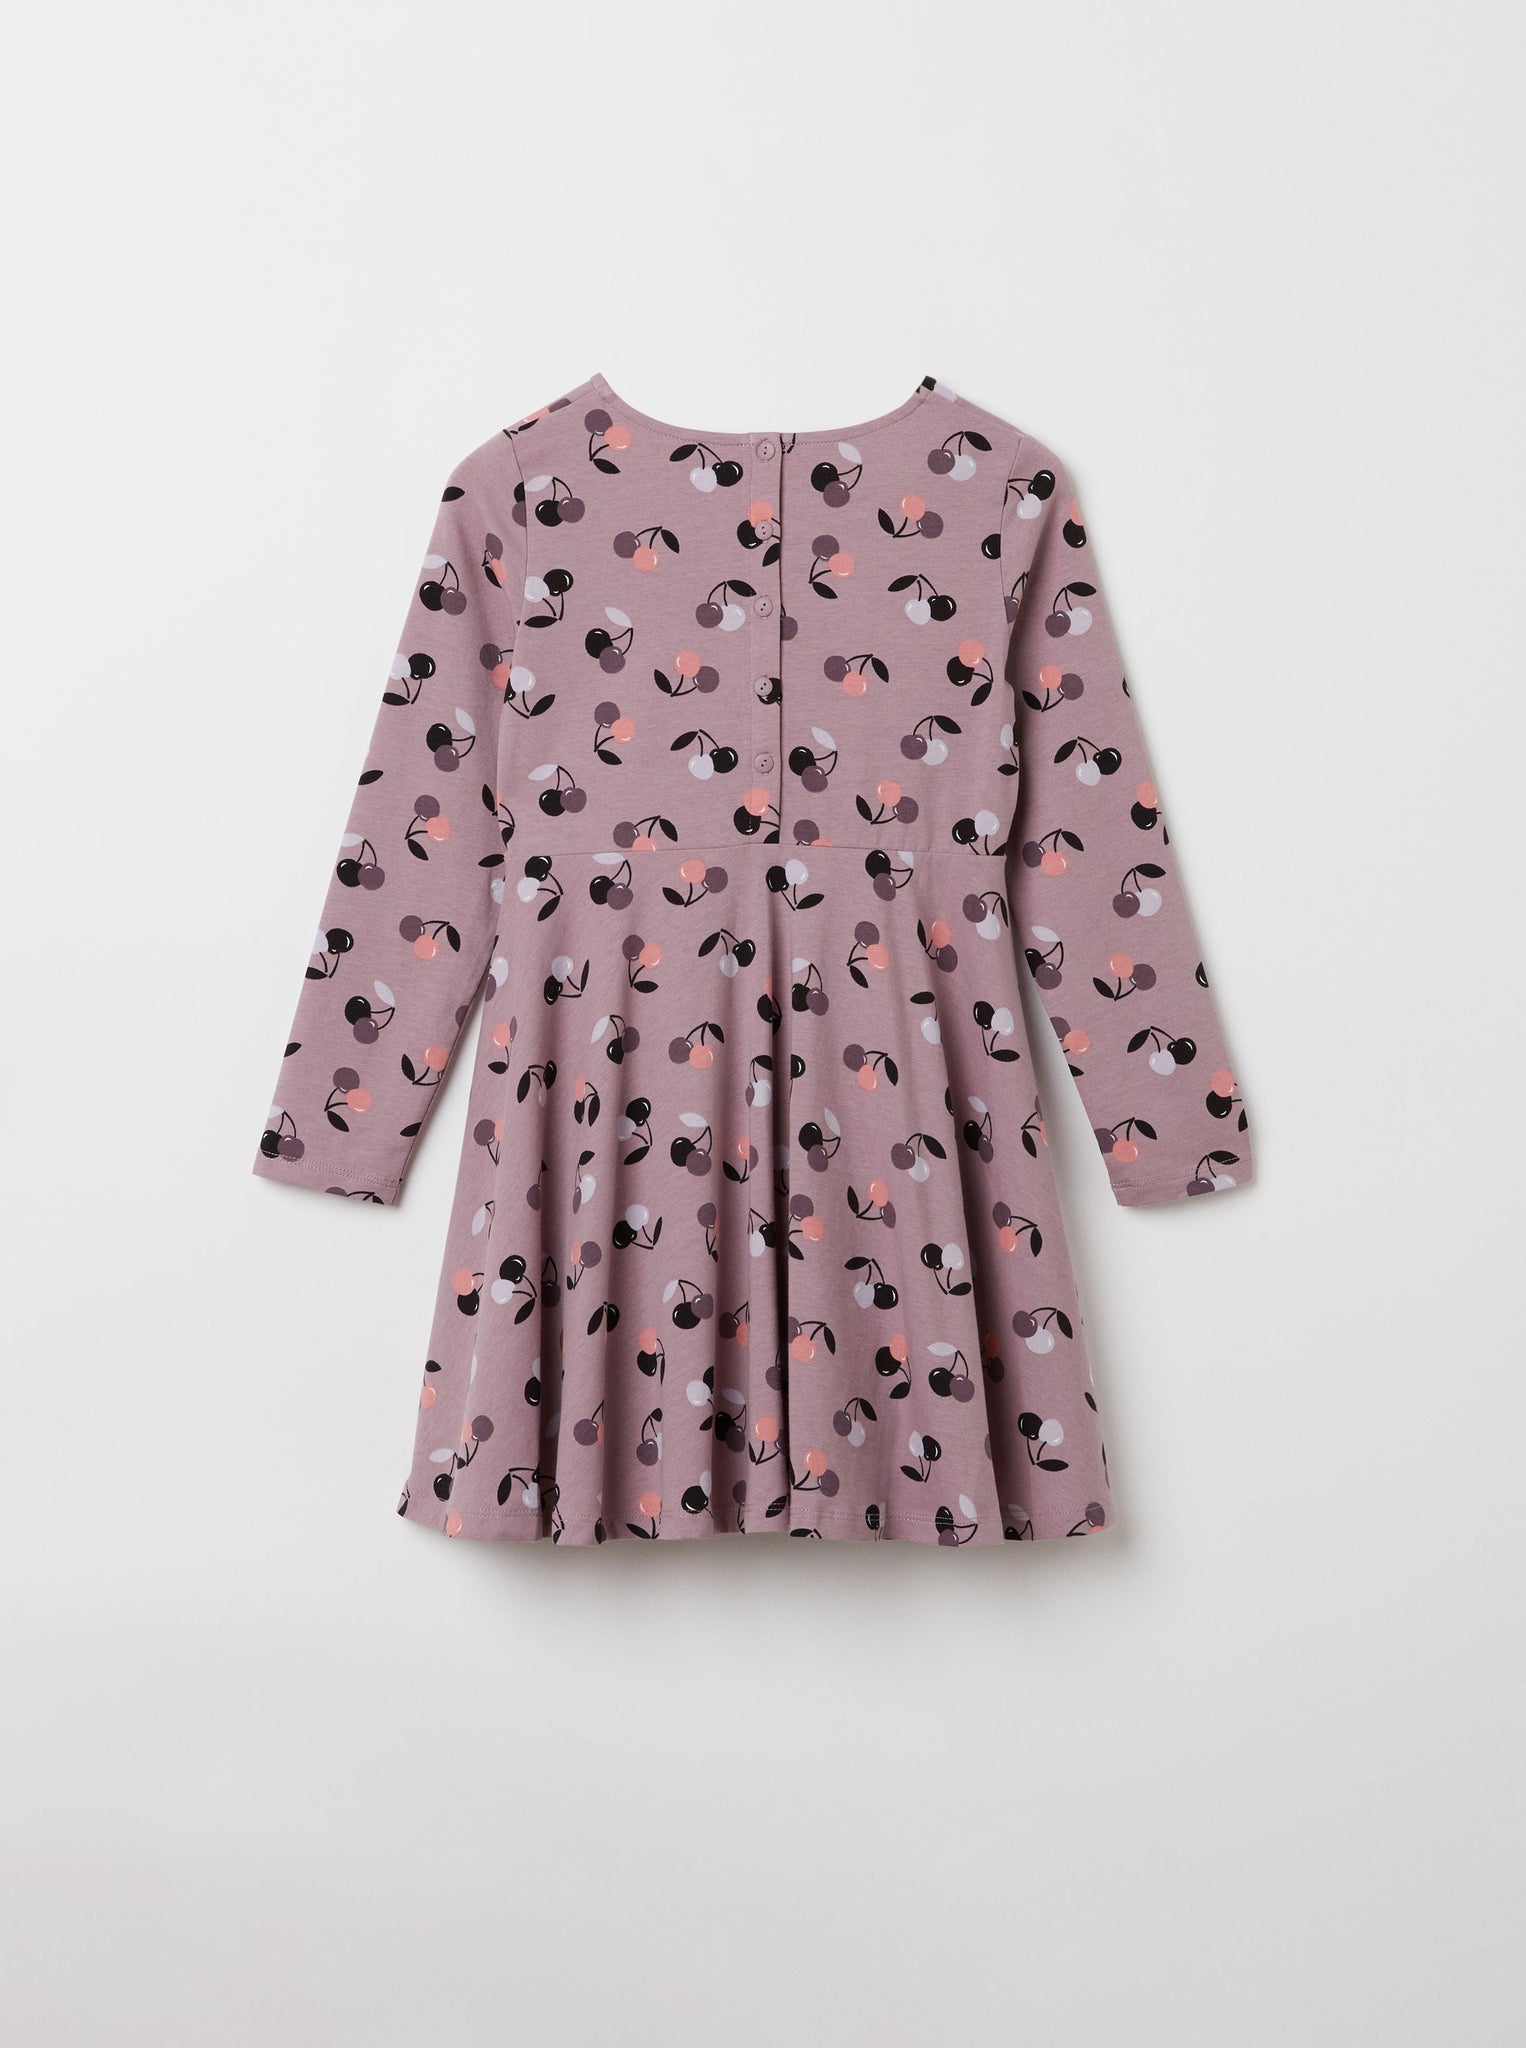 Cotton Cherry Pink Kids Dress from the Polarn O. Pyret kidswear collection. Ethically produced kids clothing.